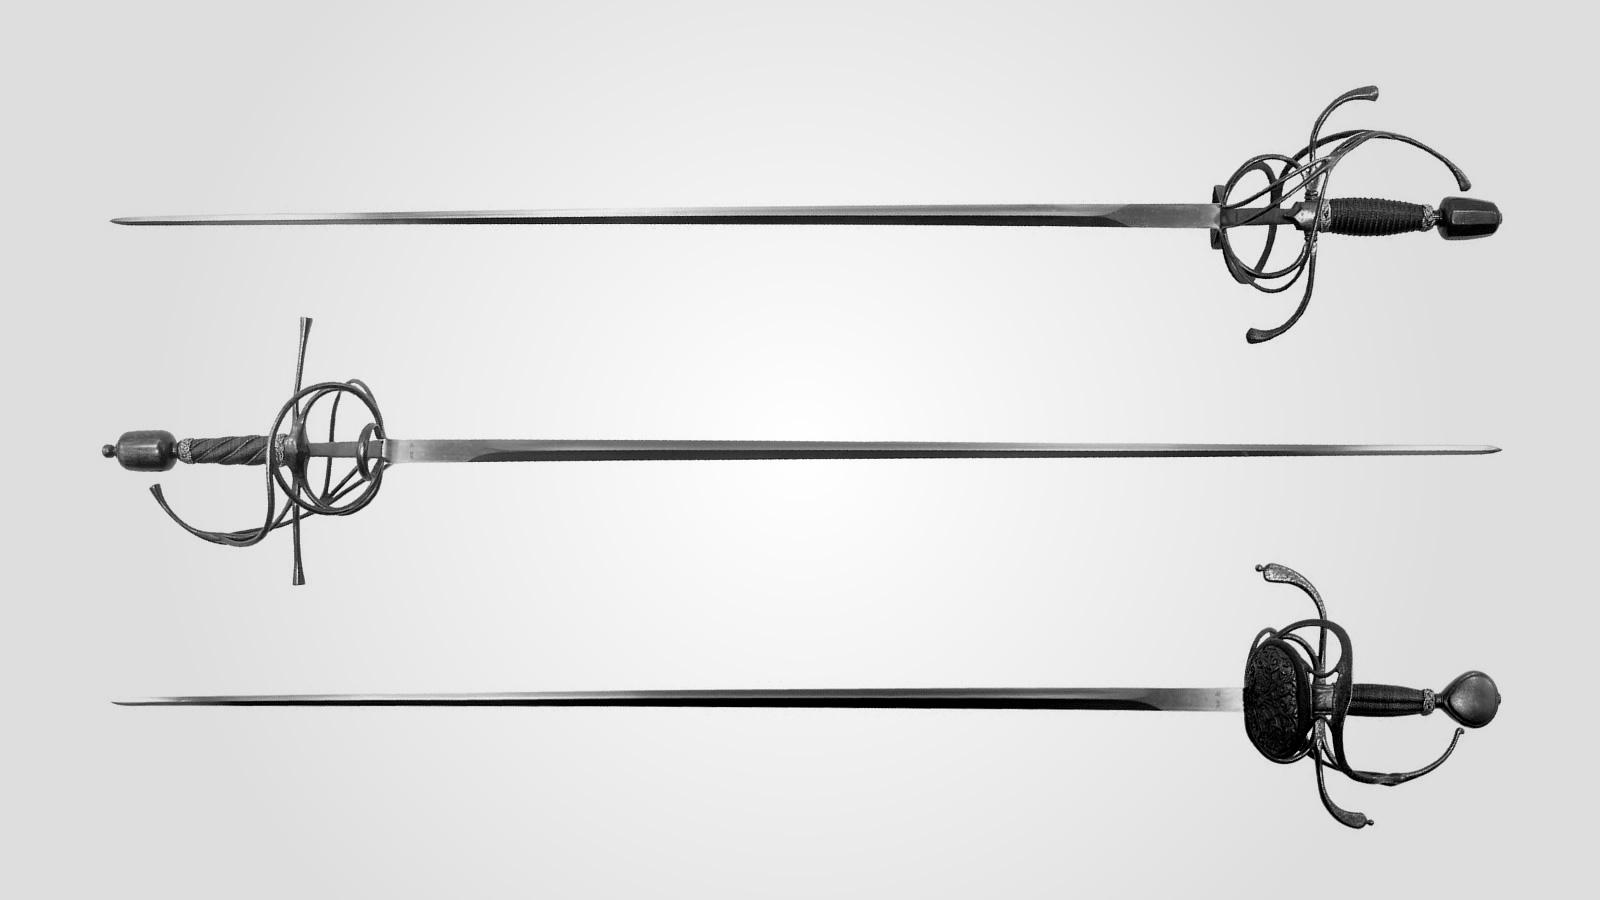 Three swords, as if from Dumas' The Three Musketeers